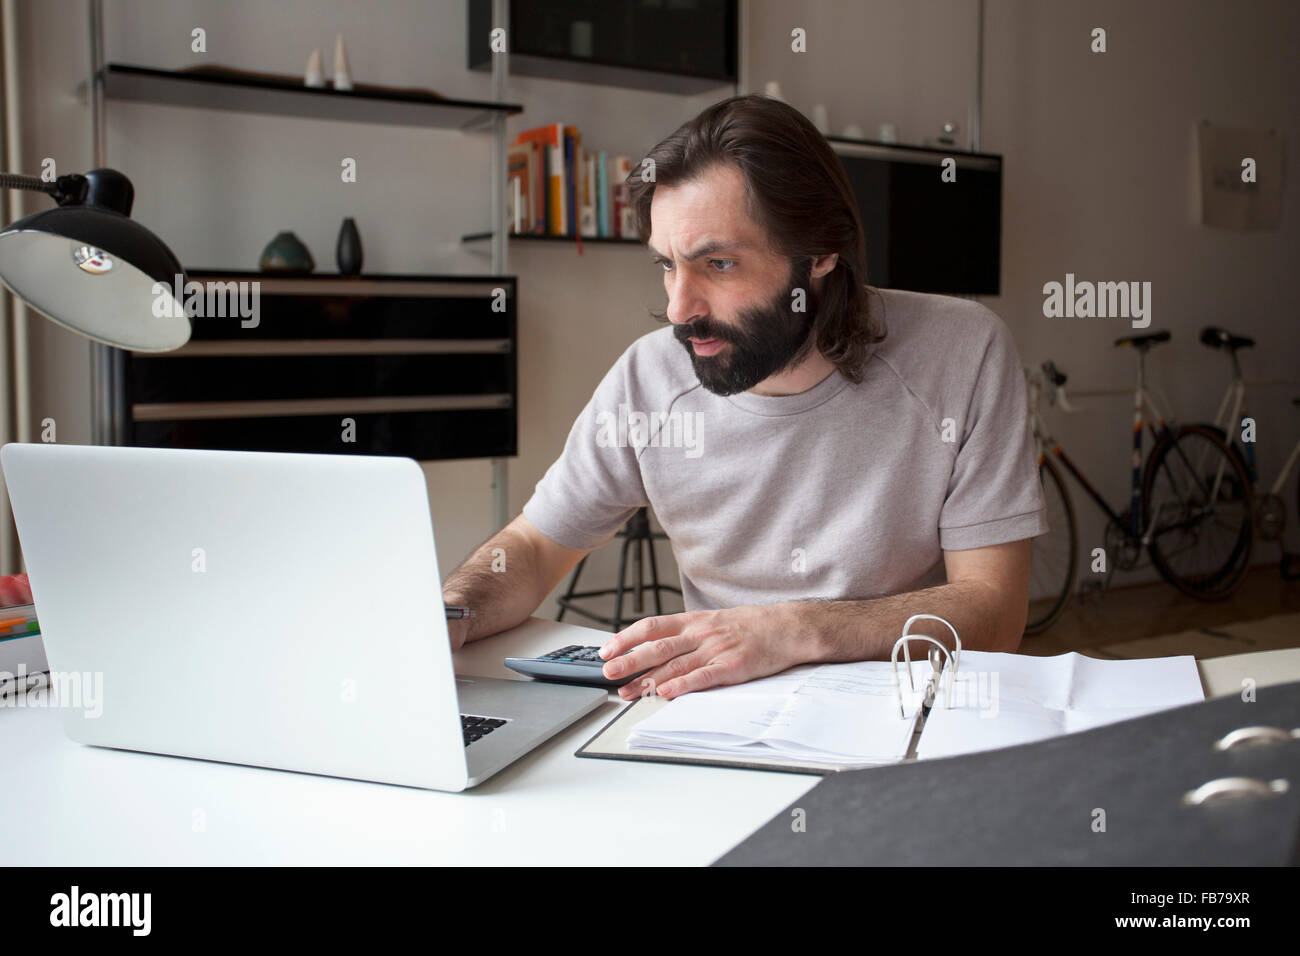 Mid adult man working on laptop at home Stock Photo